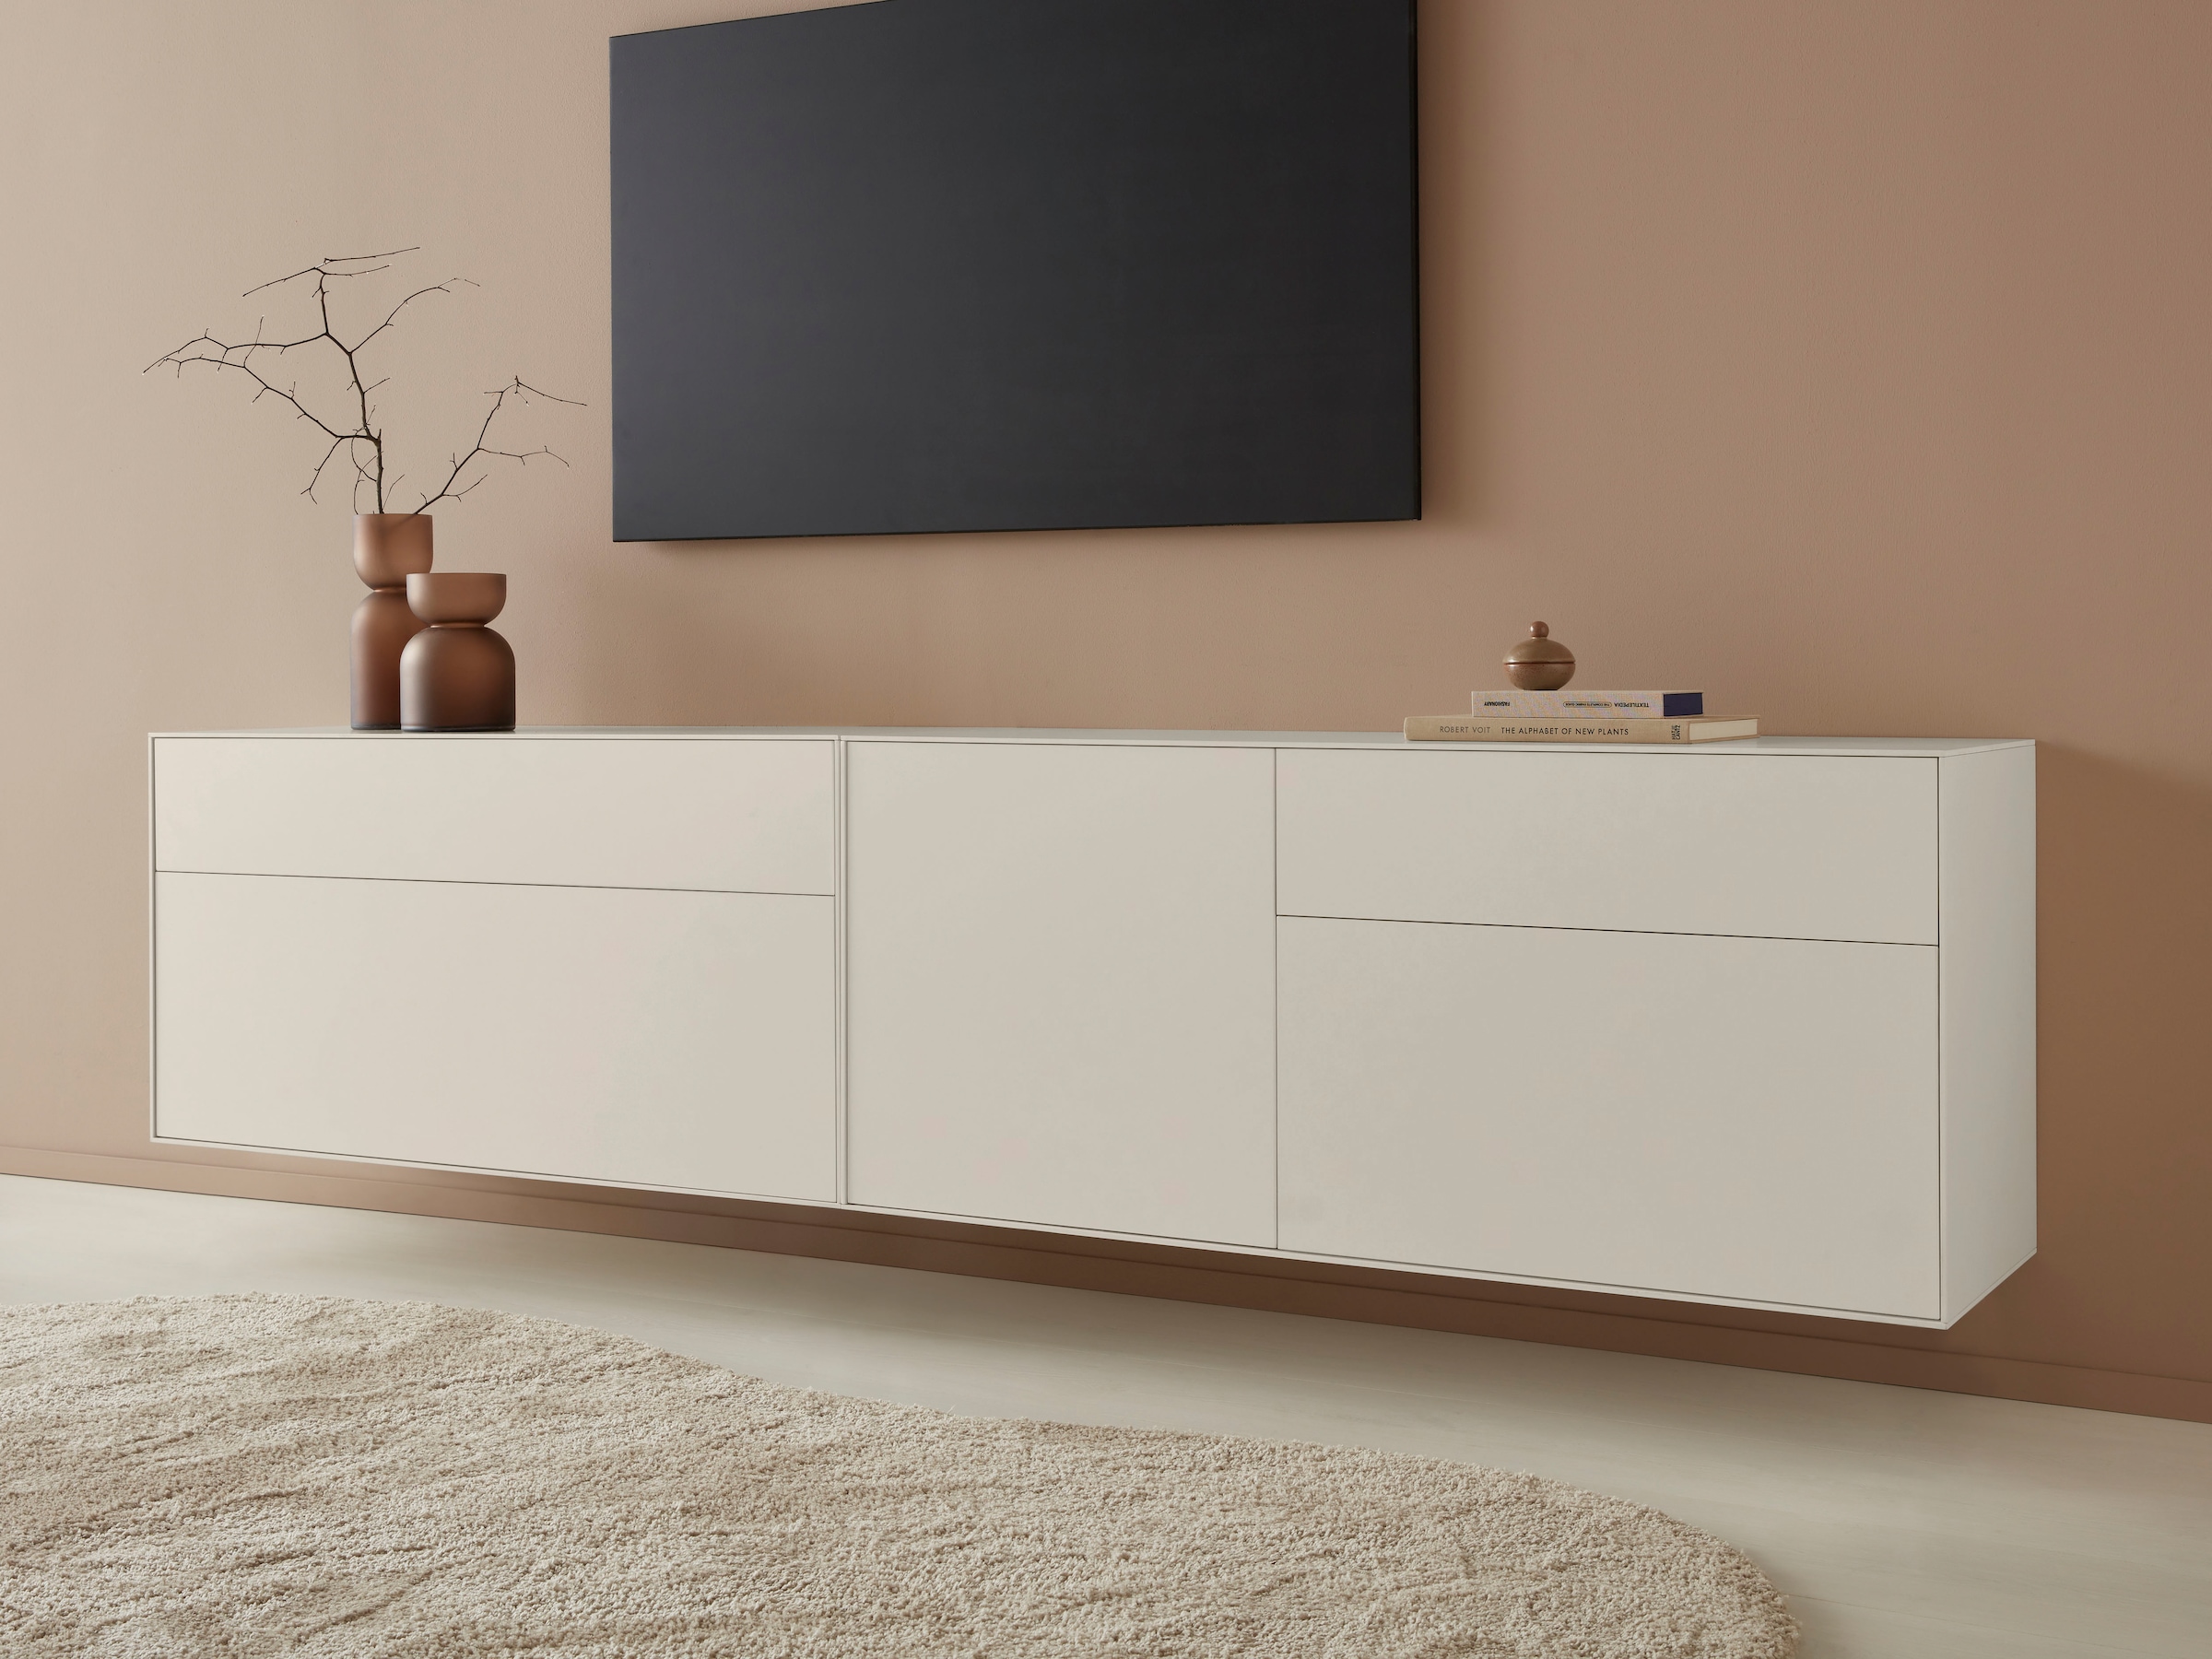 LeGer Home by Lena Gercke Lowboard »Essentials«, (2 St.), Breite: 239cm, MDF lackiert, Push-to-open-Funktion